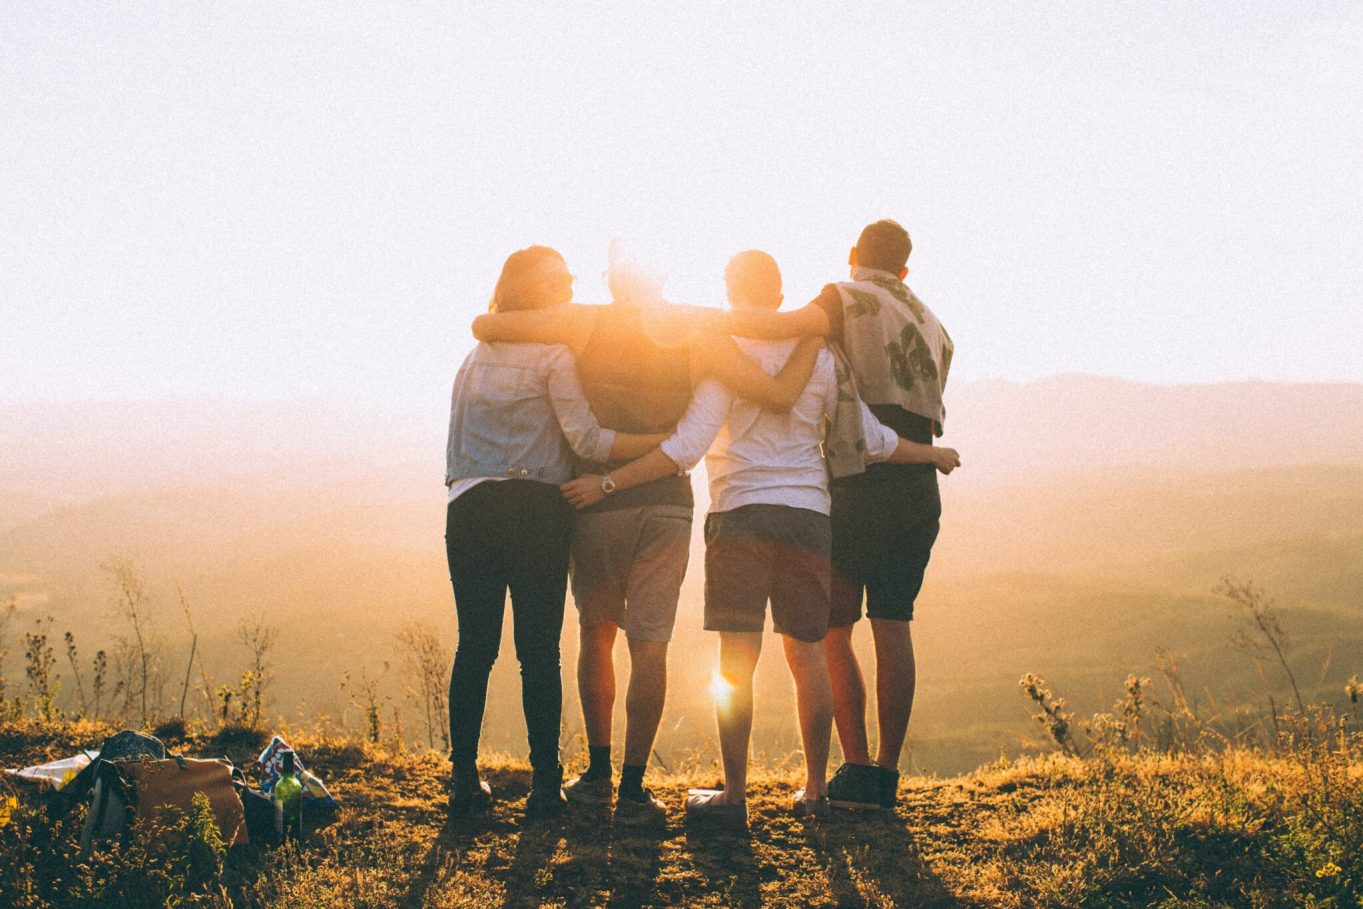 Four people share a hug. Their backs are facing the camera. Photo by Helena Lopes on Unsplash.